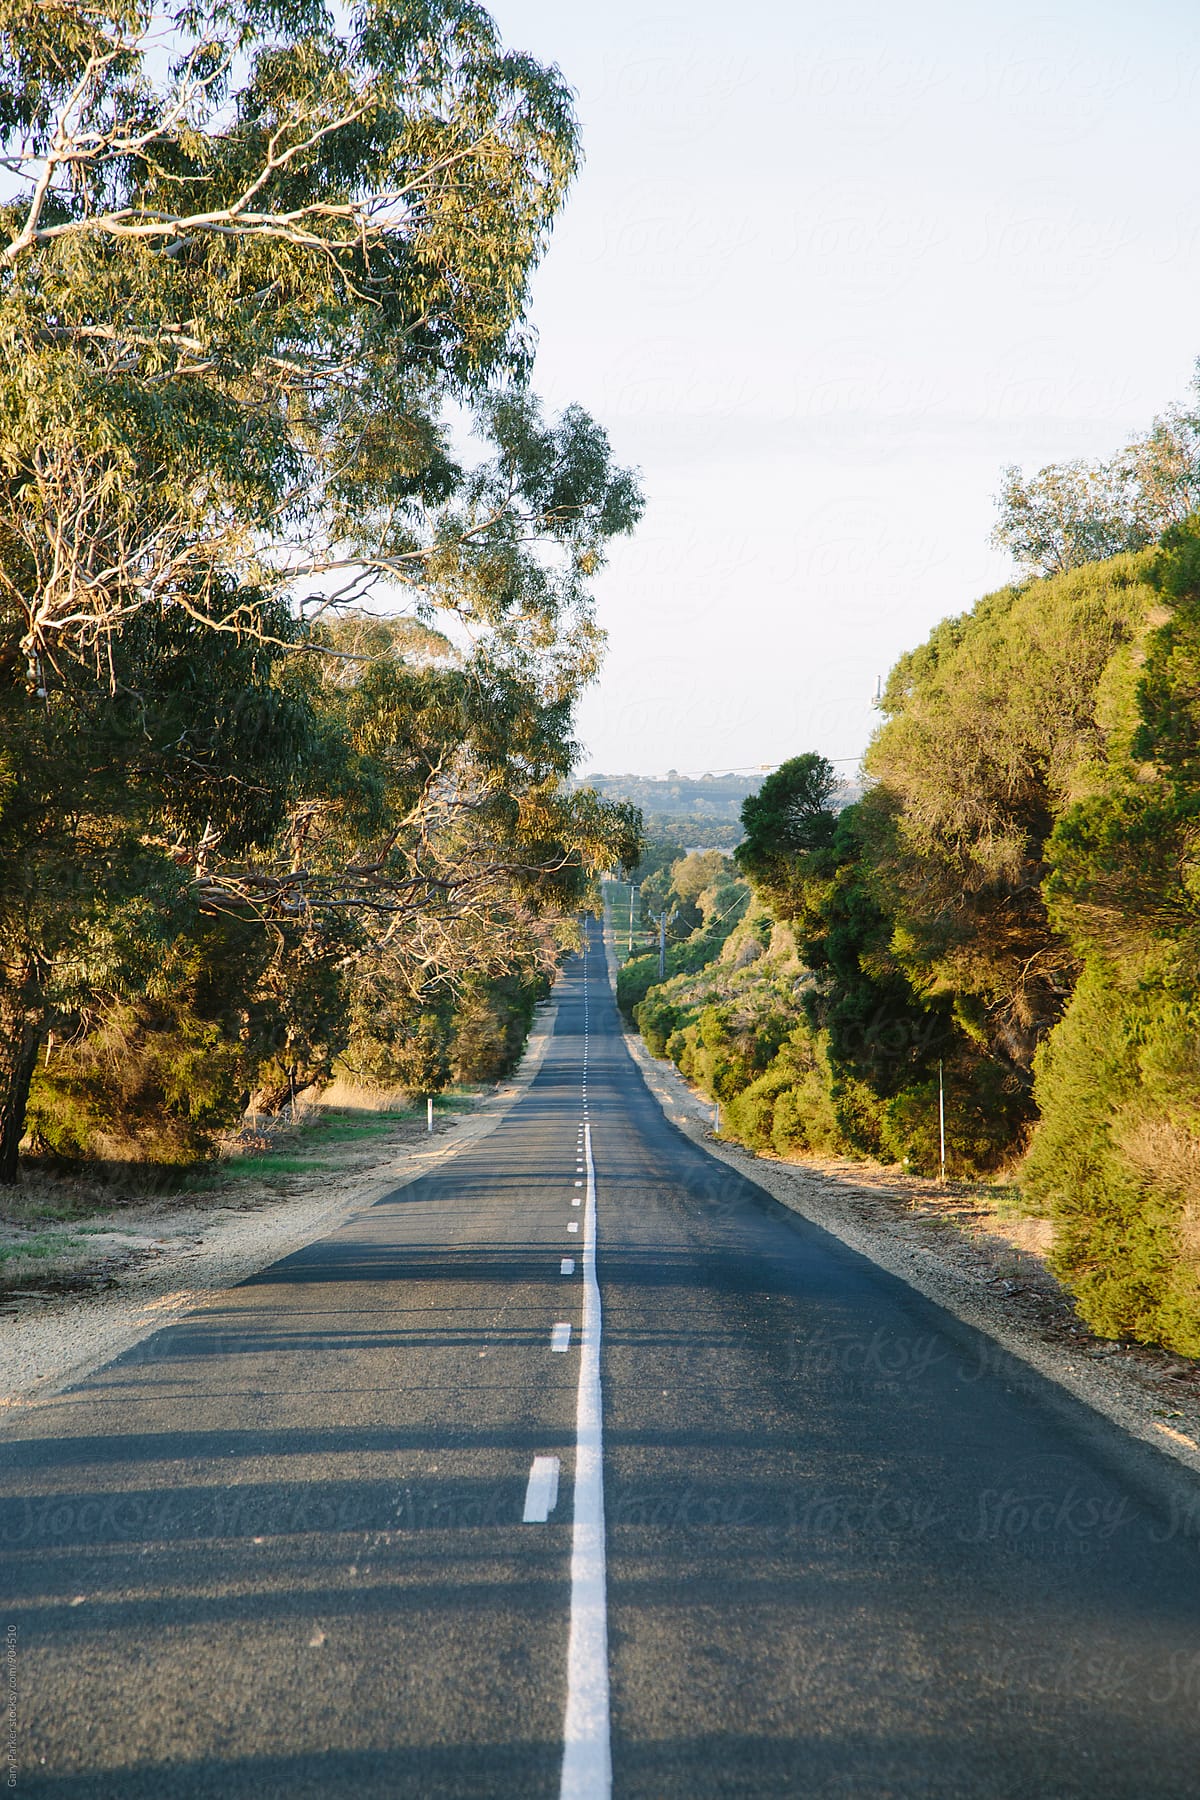 A straight road lined with gum trees in the country